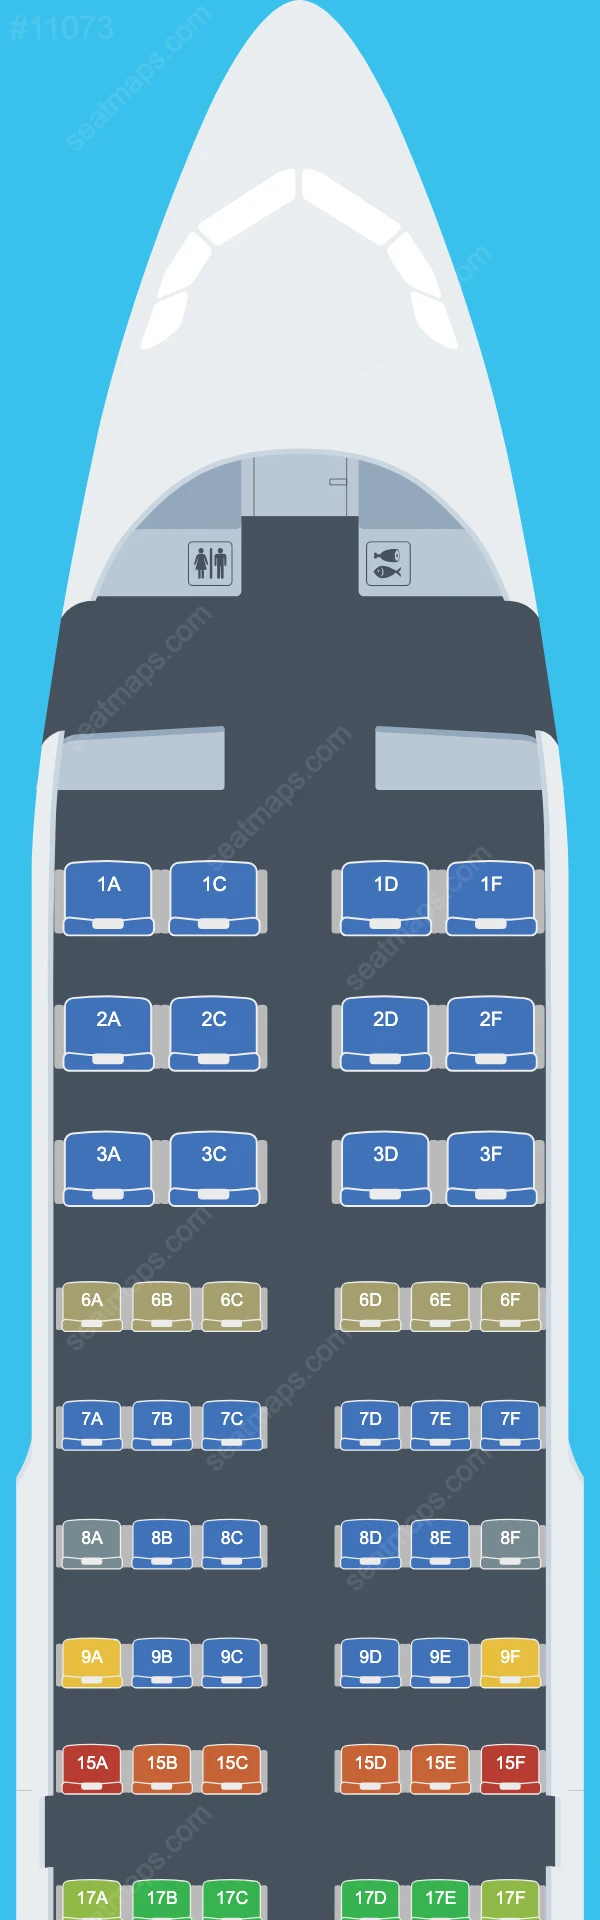 Alaska Airlines Airbus A319 Seat Maps A319-100 V.2